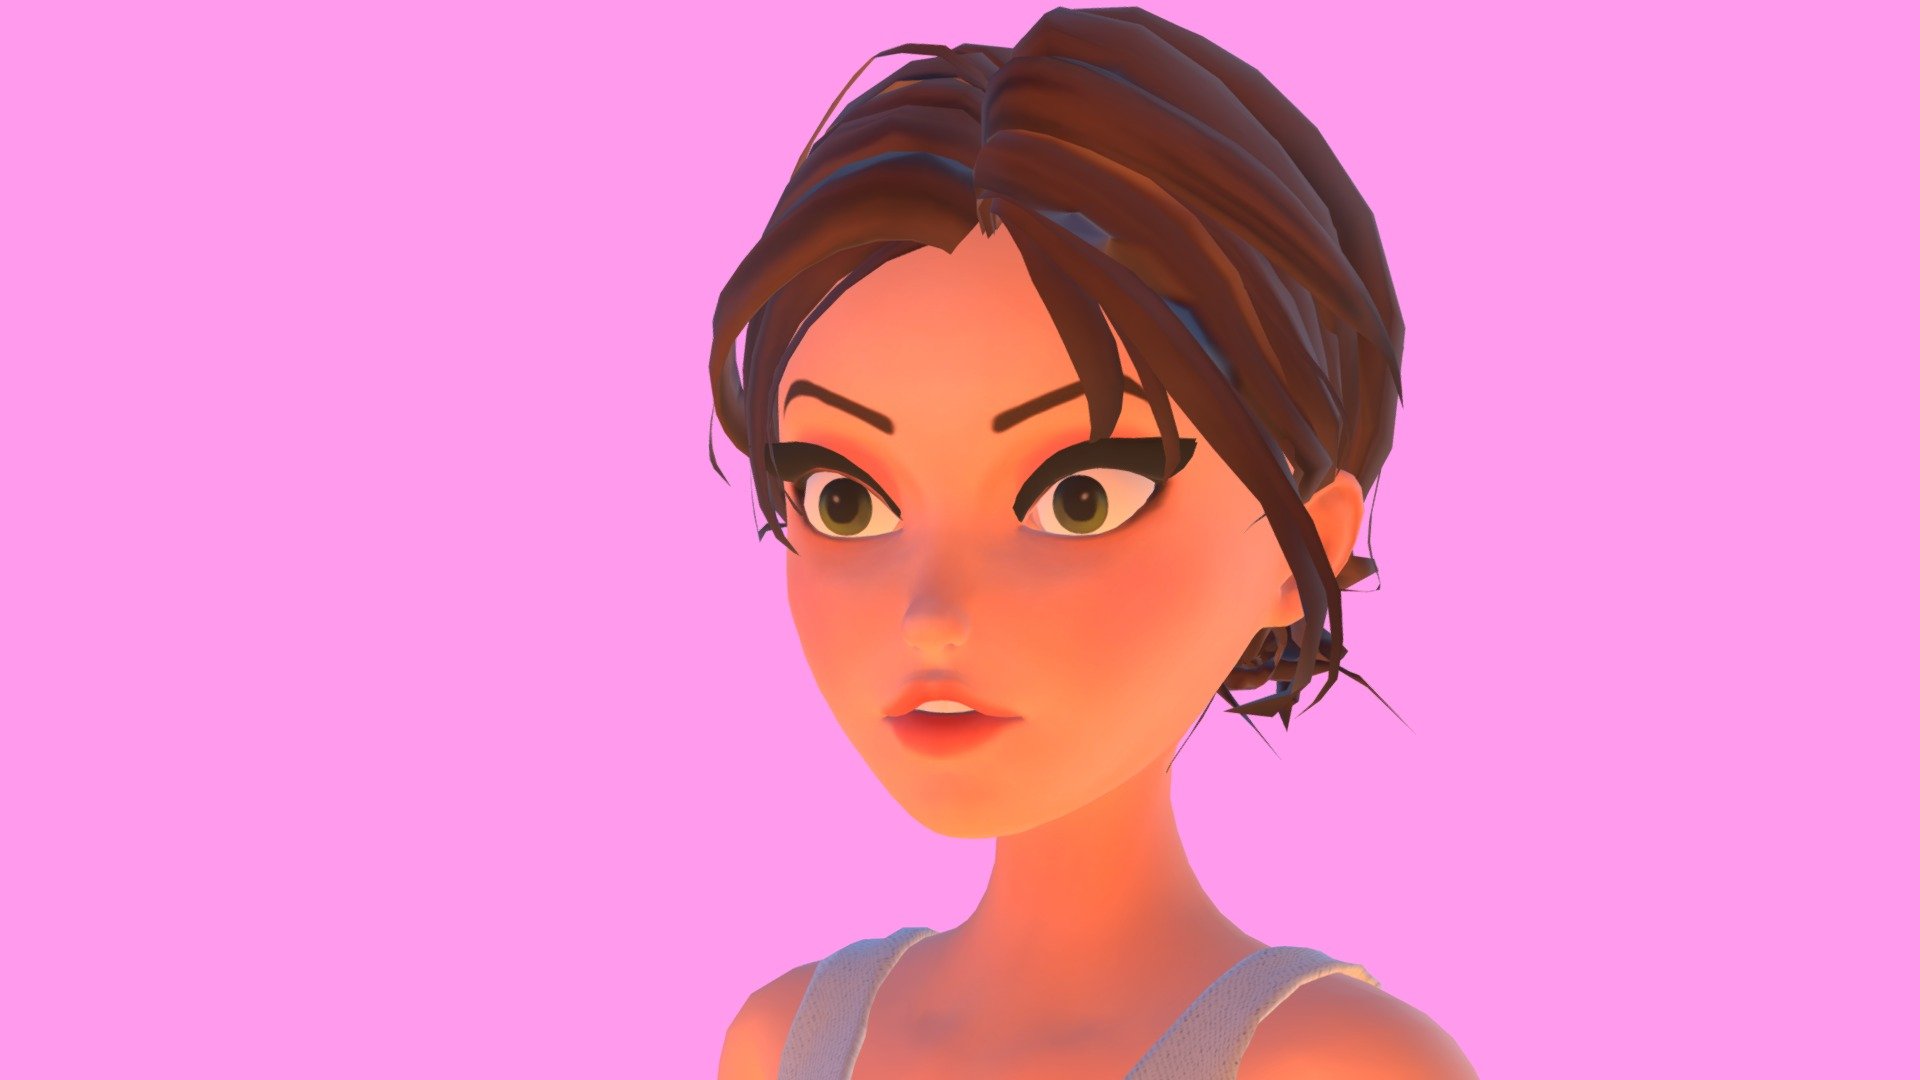 The Styilized Girl has a game ready full body rig including face rig and blendshape.

Geometry: 


Triangles 67.4k - Low Poly Suitable for games
Separate mesh parts

File types:


Blender - game ready, fully rigged and textured
FBX - game ready, fully rigged and textured
Unitypackage - game ready, fully rigged and textured

Rig and blendshape:


Full body game ready humanoid rig
Close and open eyes blendshape

Animation:


Includes an idle animation
 - Stylized Girl | Game ready, rigged & animated - Buy Royalty Free 3D model by RedicionArts 3d model